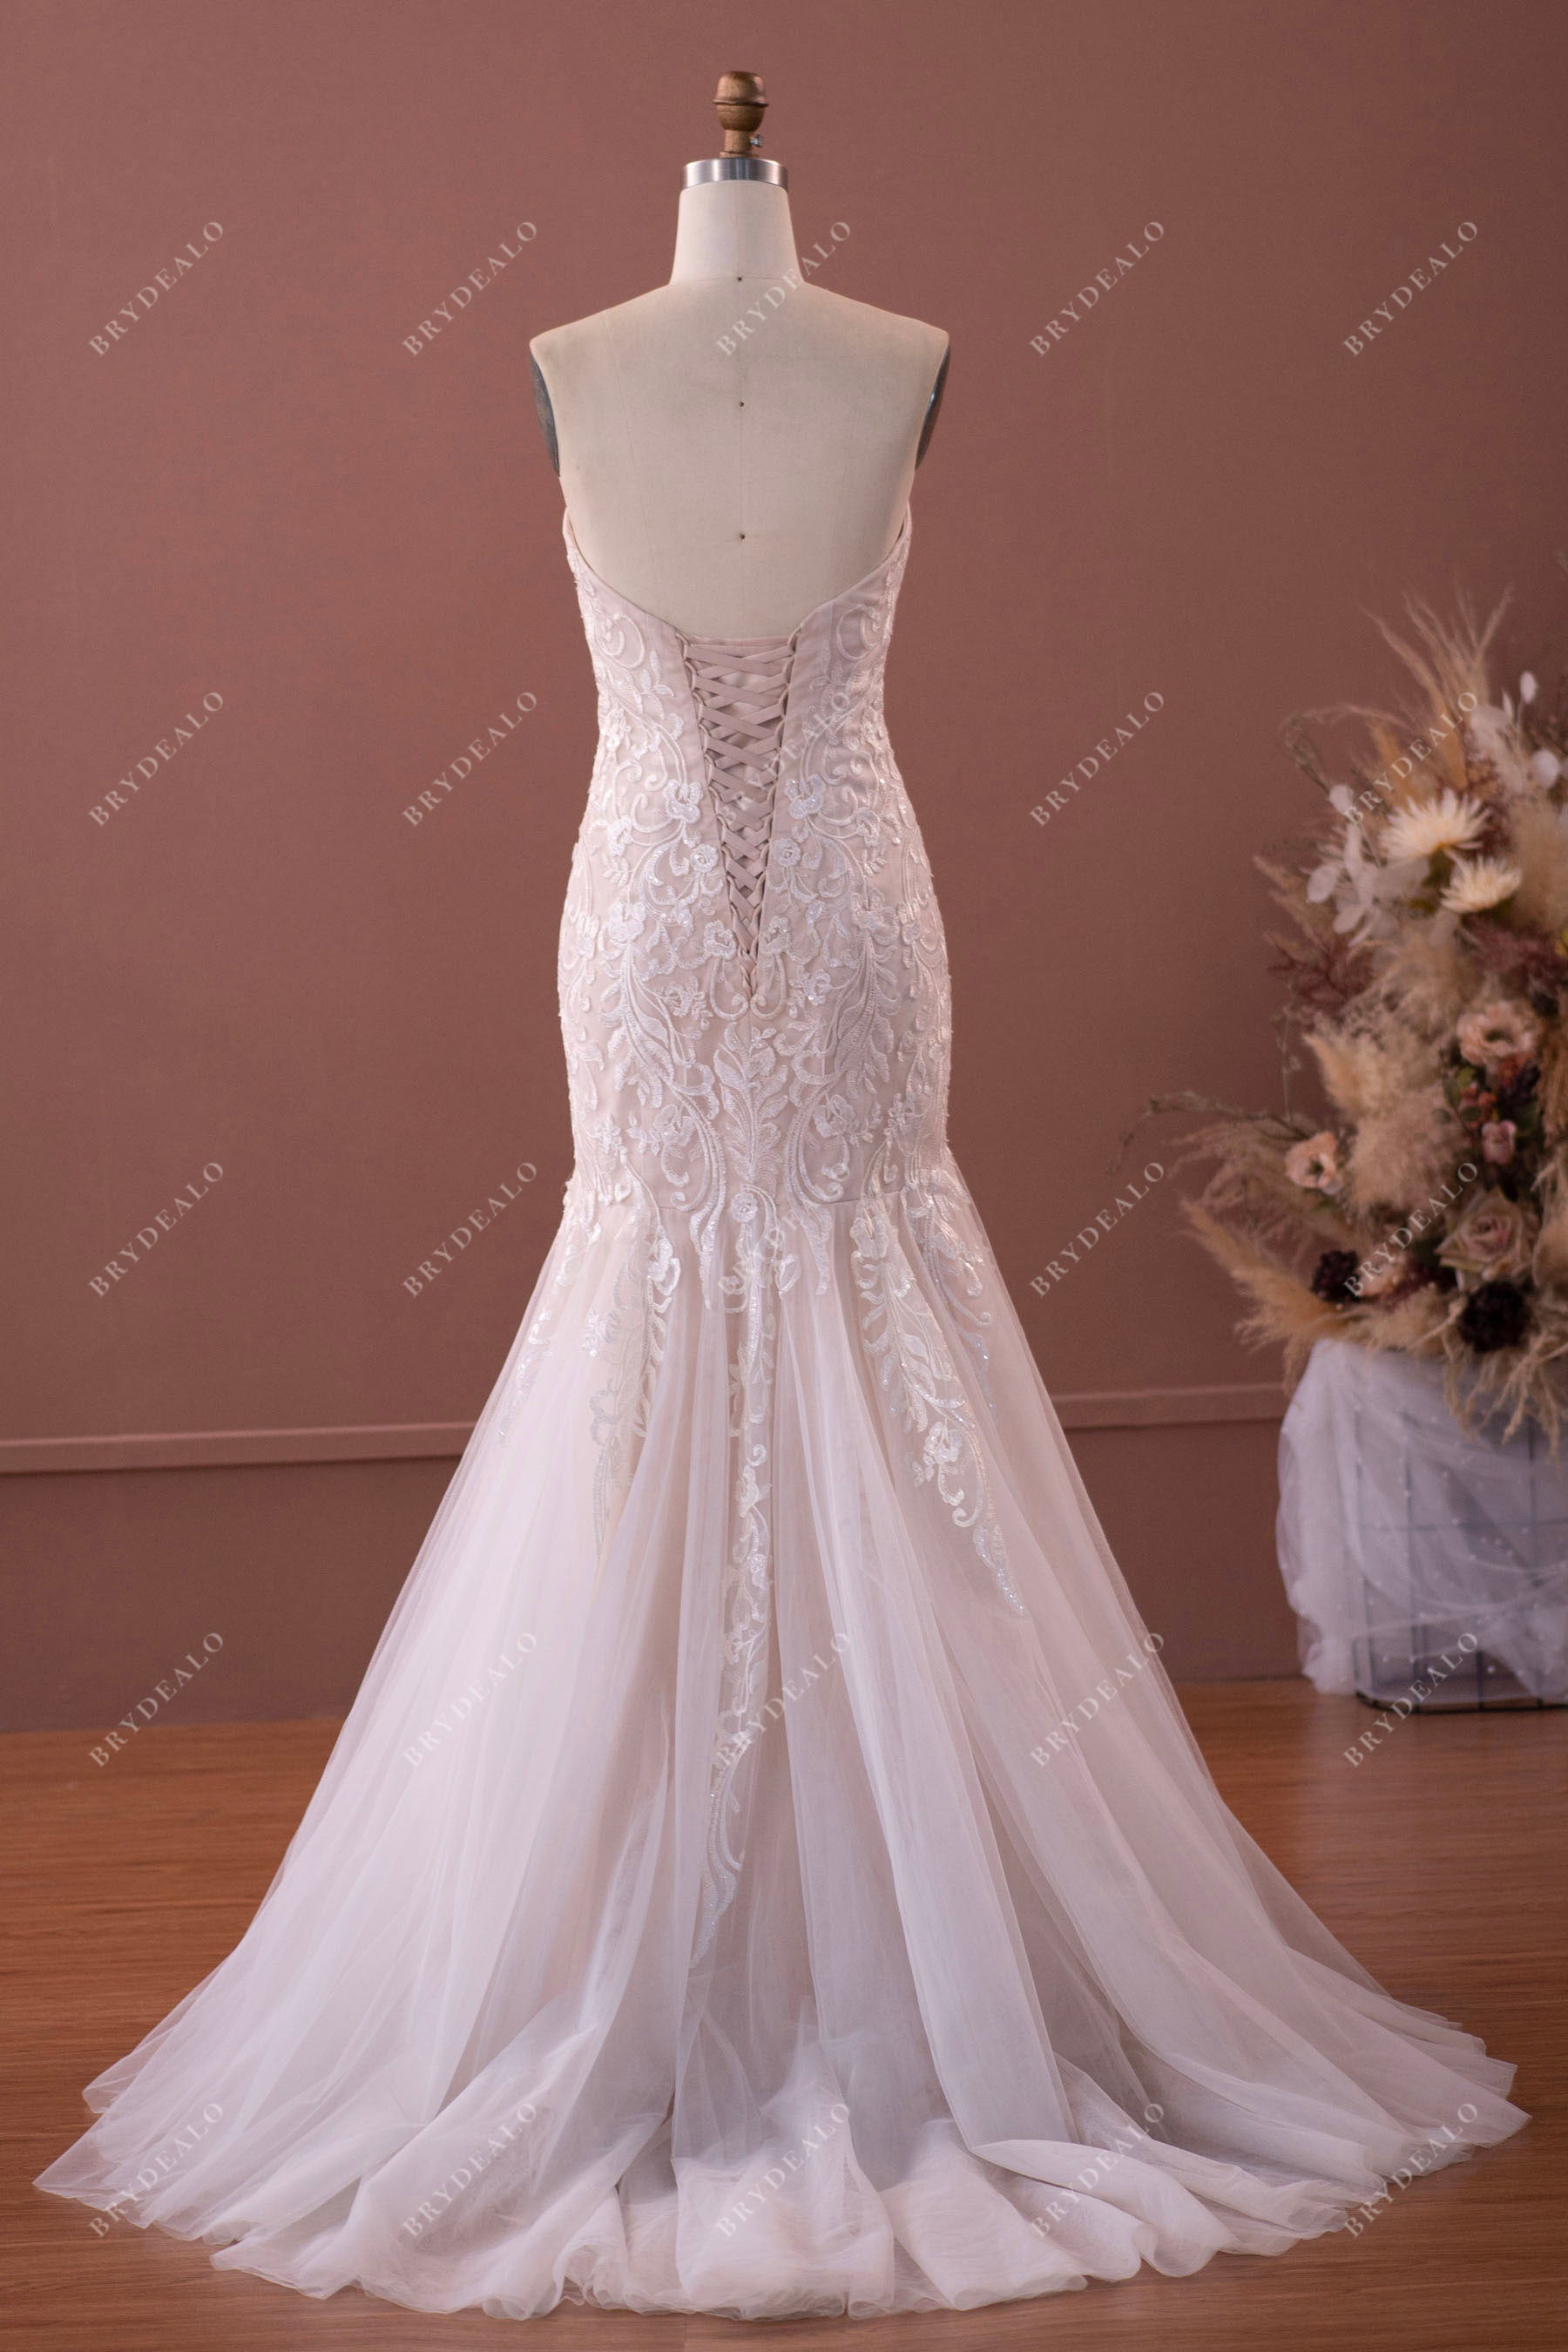 strapless sweetheart mermaid wedding dress sample with lace up back